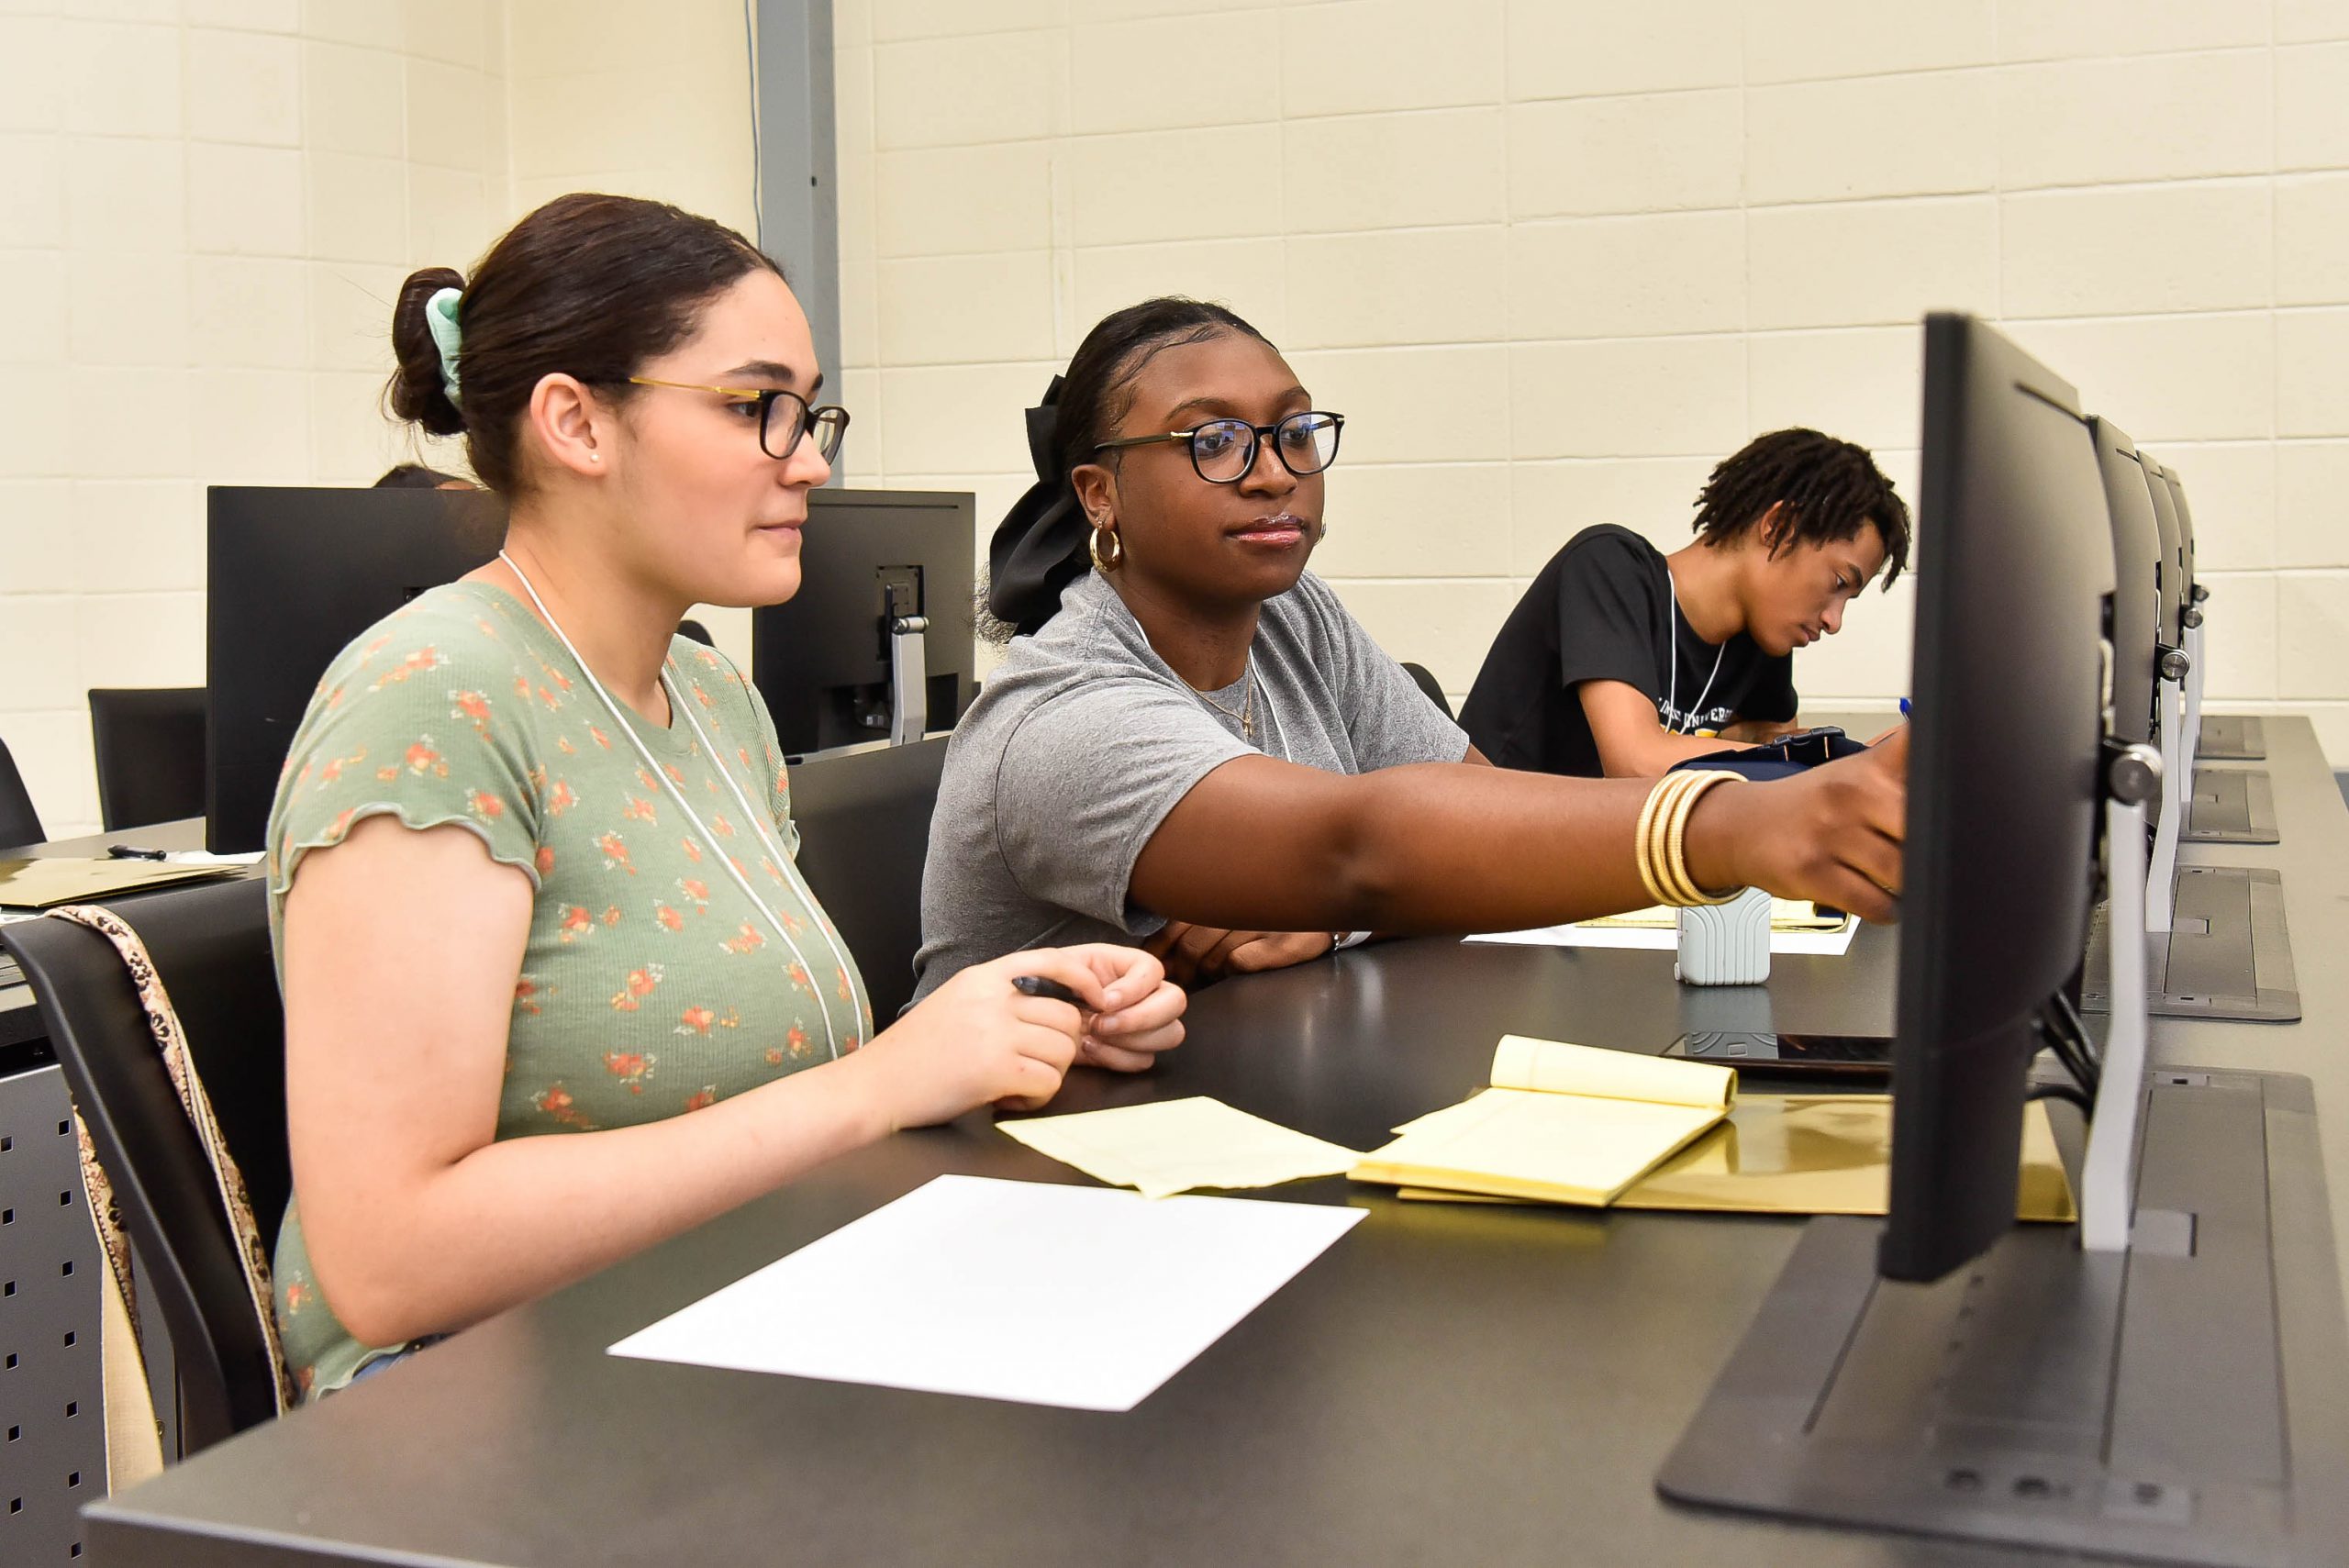 Grambling State News: High School Students Gain Cybersecurity and Cyberthreat Expertise at Computer Science Camp